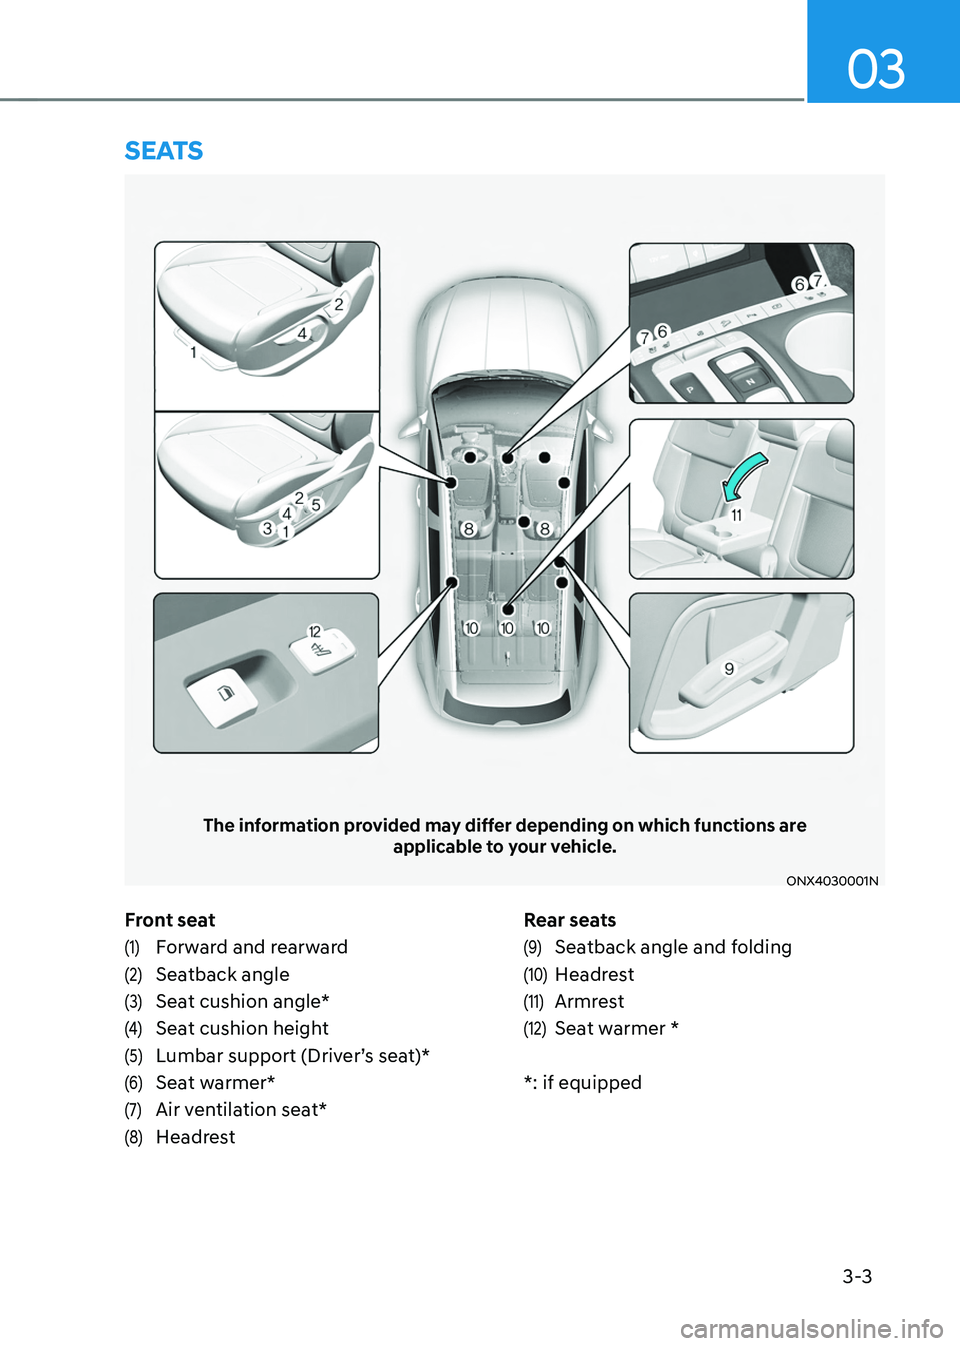 HYUNDAI TUCSON 2022 Owners Guide 3-3
03
Front seat
(1) Forward and rearward
(2) Seatback angle
(3) Seat cushion angle*
(4) Seat cushion height
(5) Lumbar support (Driver’s seat)*
(6) Seat warmer*
(7) Air ventilation seat*
(8) Headr